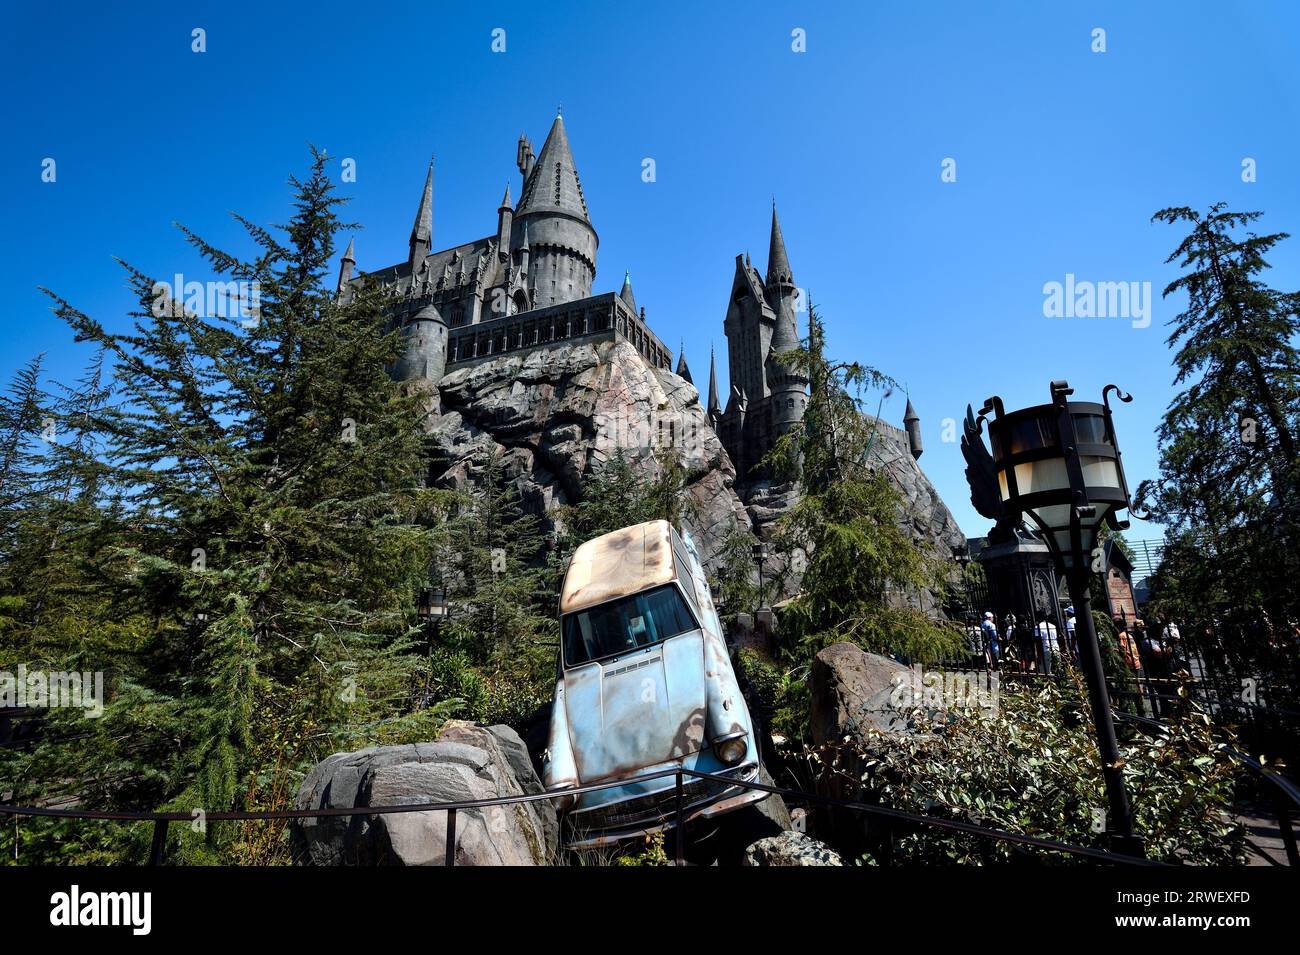 Hogwarts Castle replica at the Wizarding World of Harry Potter area in Universal Studios Hollywood - Los Angeles, California Stock Photo